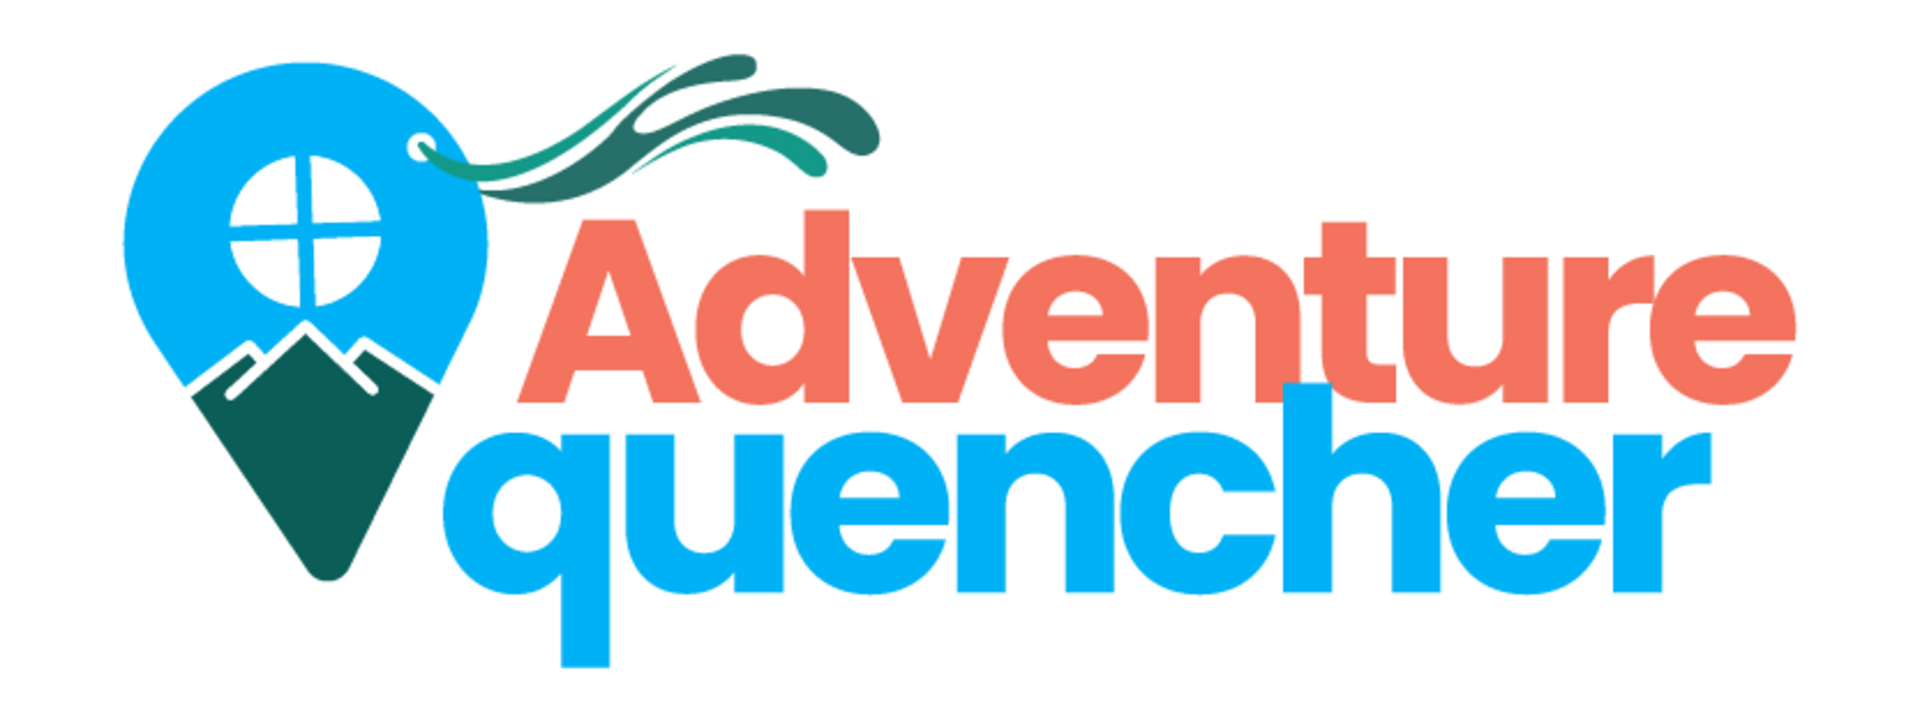 Adventure-Quencher_Outline_Final.png